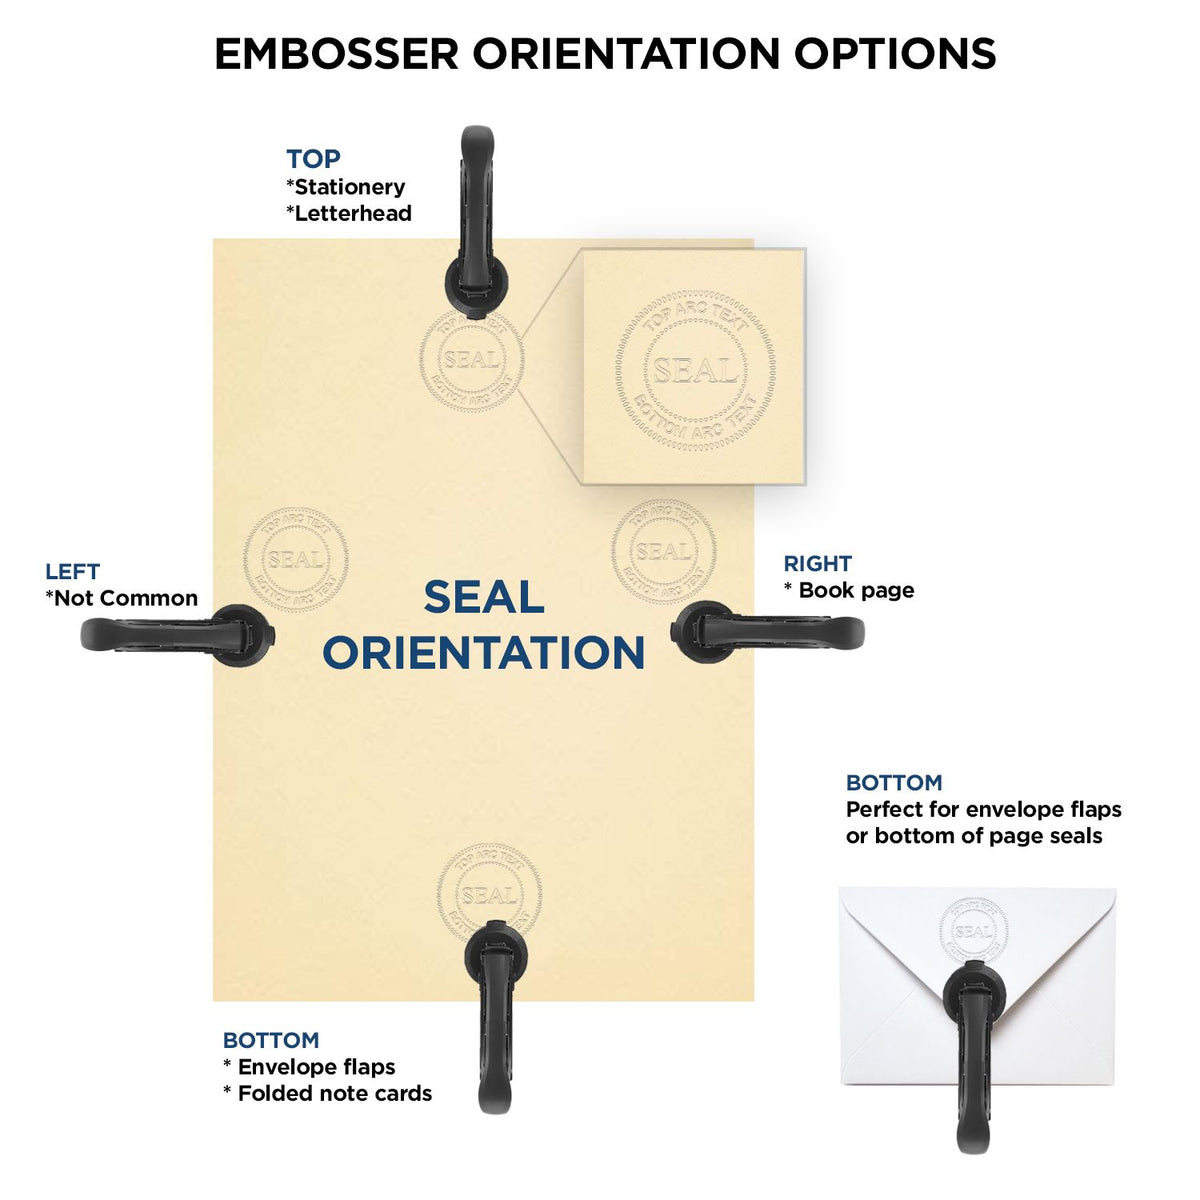 An infographic for the Long Reach South Dakota PE Seal showing embosser orientation, this is showing examples of a top, bottom, right and left insert.